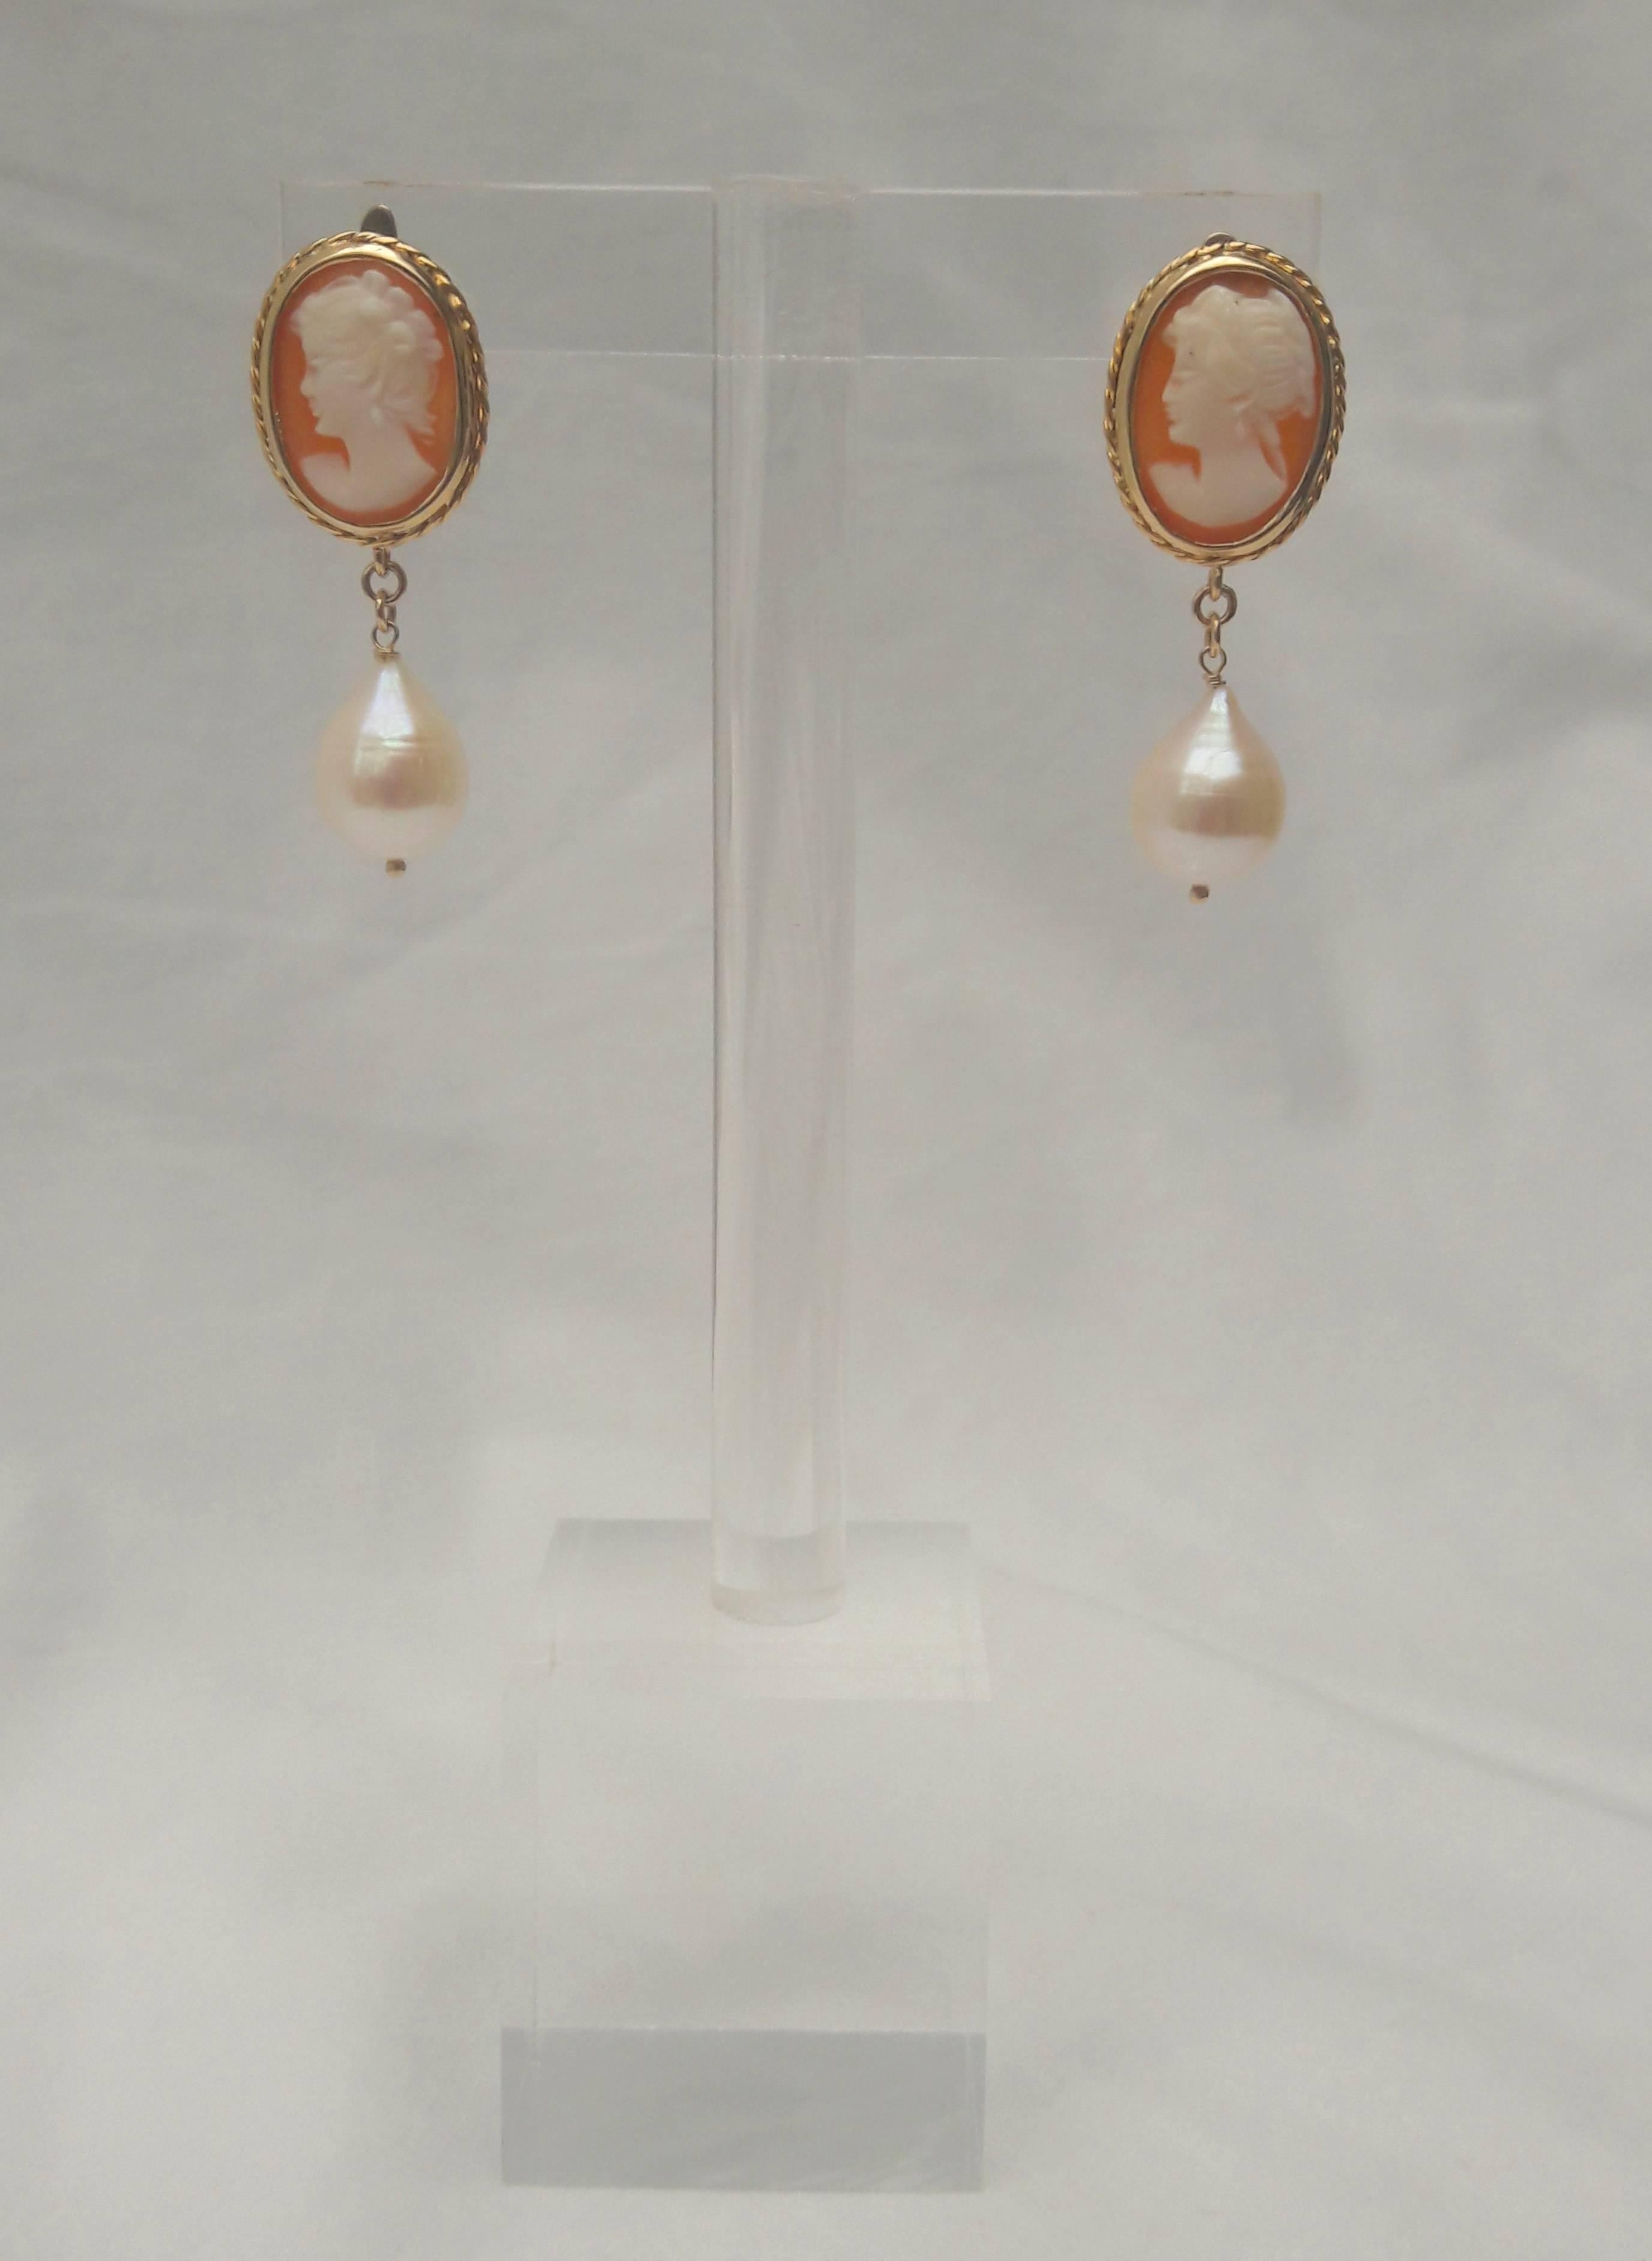 One-of-a kind Hand Carved European cameo earrings, in yellow gold setting.
Paired with large teardrop pearl. 
Secured with (European style) clip-on locking stud.

End to end measures 1.25 inches long

Made by Marina J. 2017

**All Marina Handmade